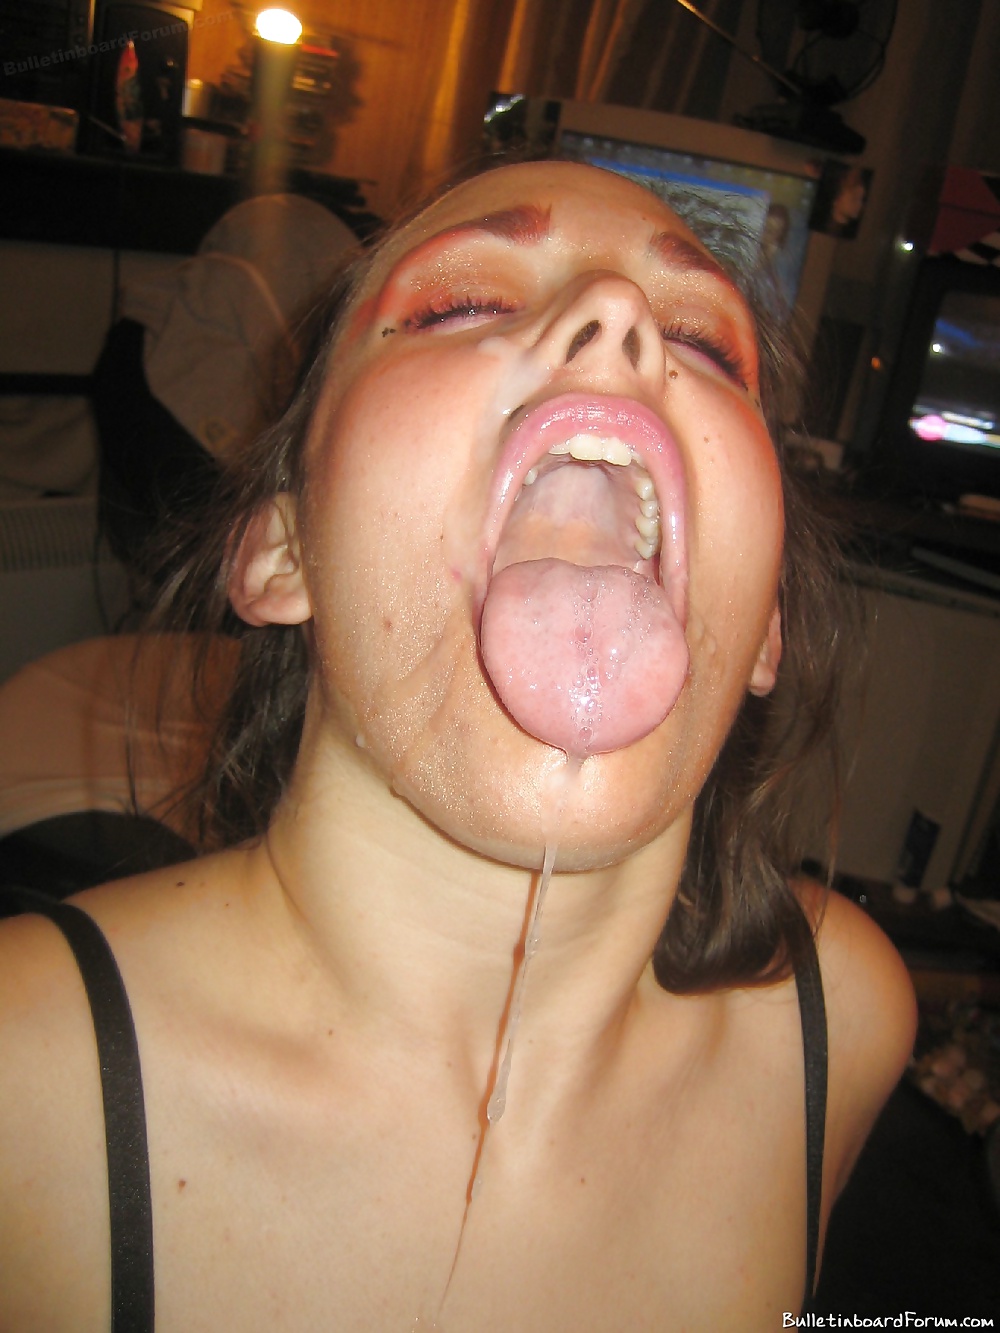 Forced Open Mouth Porn - Mouth Open And Tongue Out Ready For Cum Pics Xhamster 11130 | Hot Sex  Picture